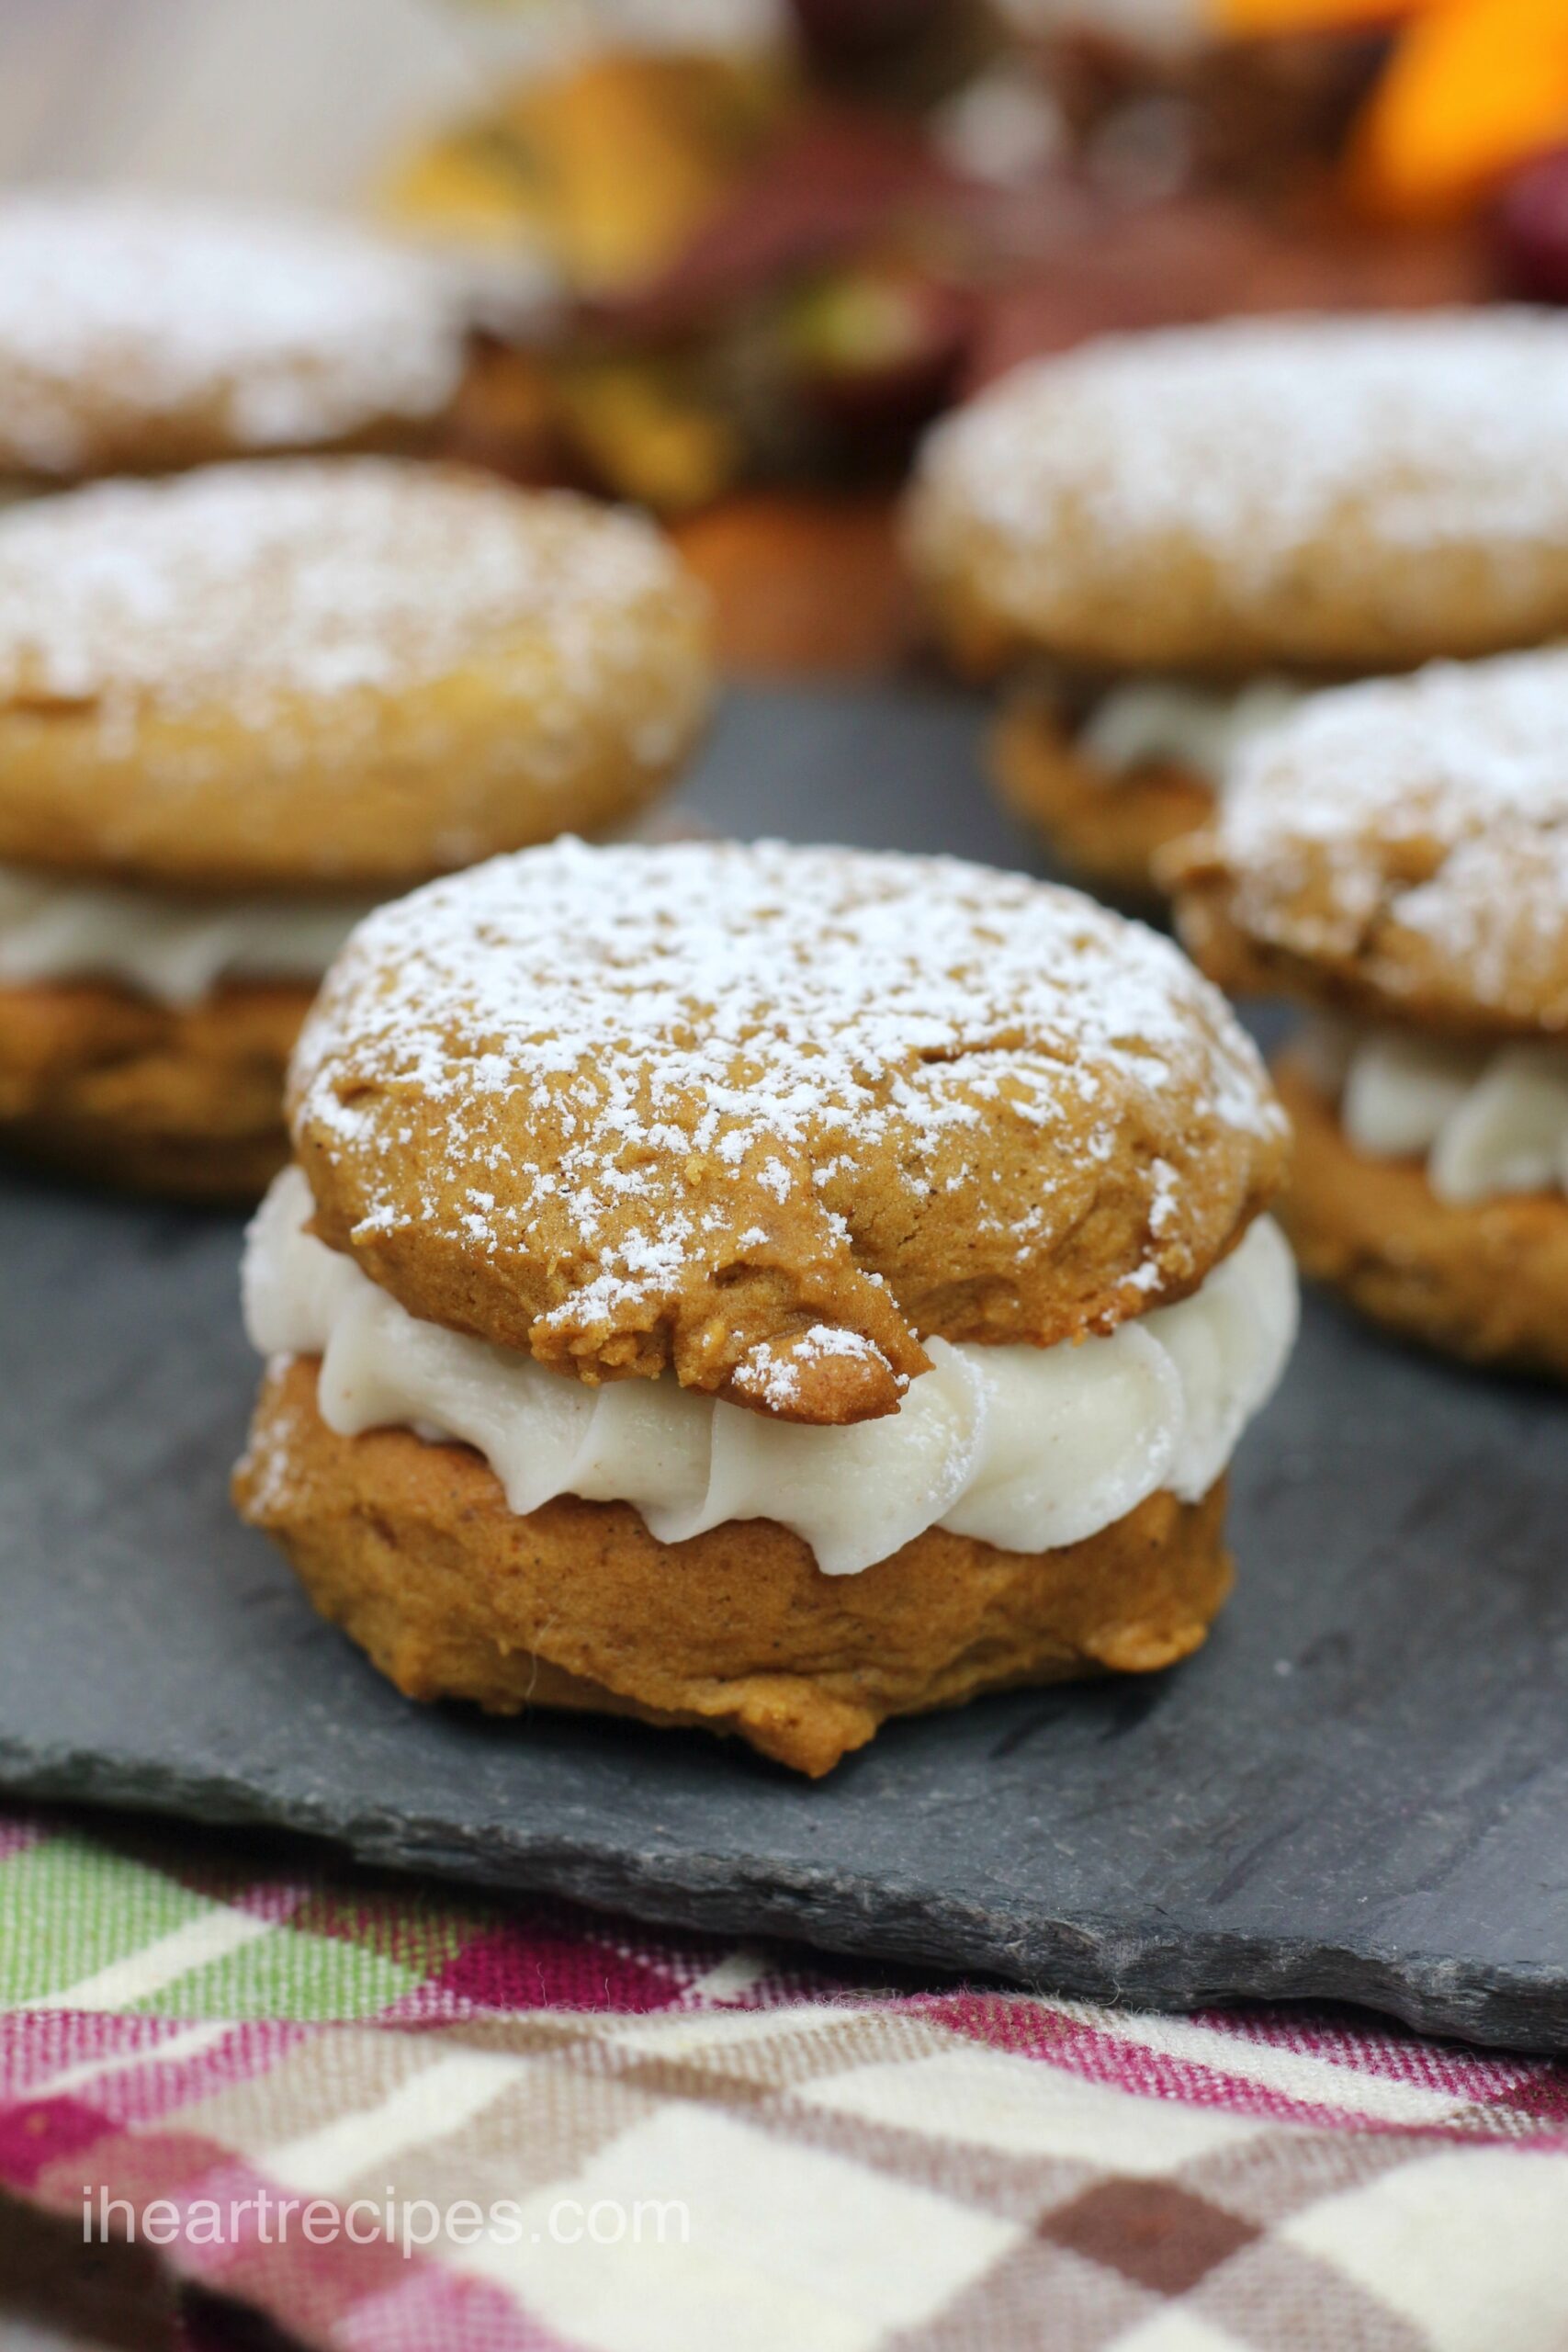 A close up image of a pumpkin gingerbread whoopie pie, filled with sweet cream icing and dusted with powdered sugar.